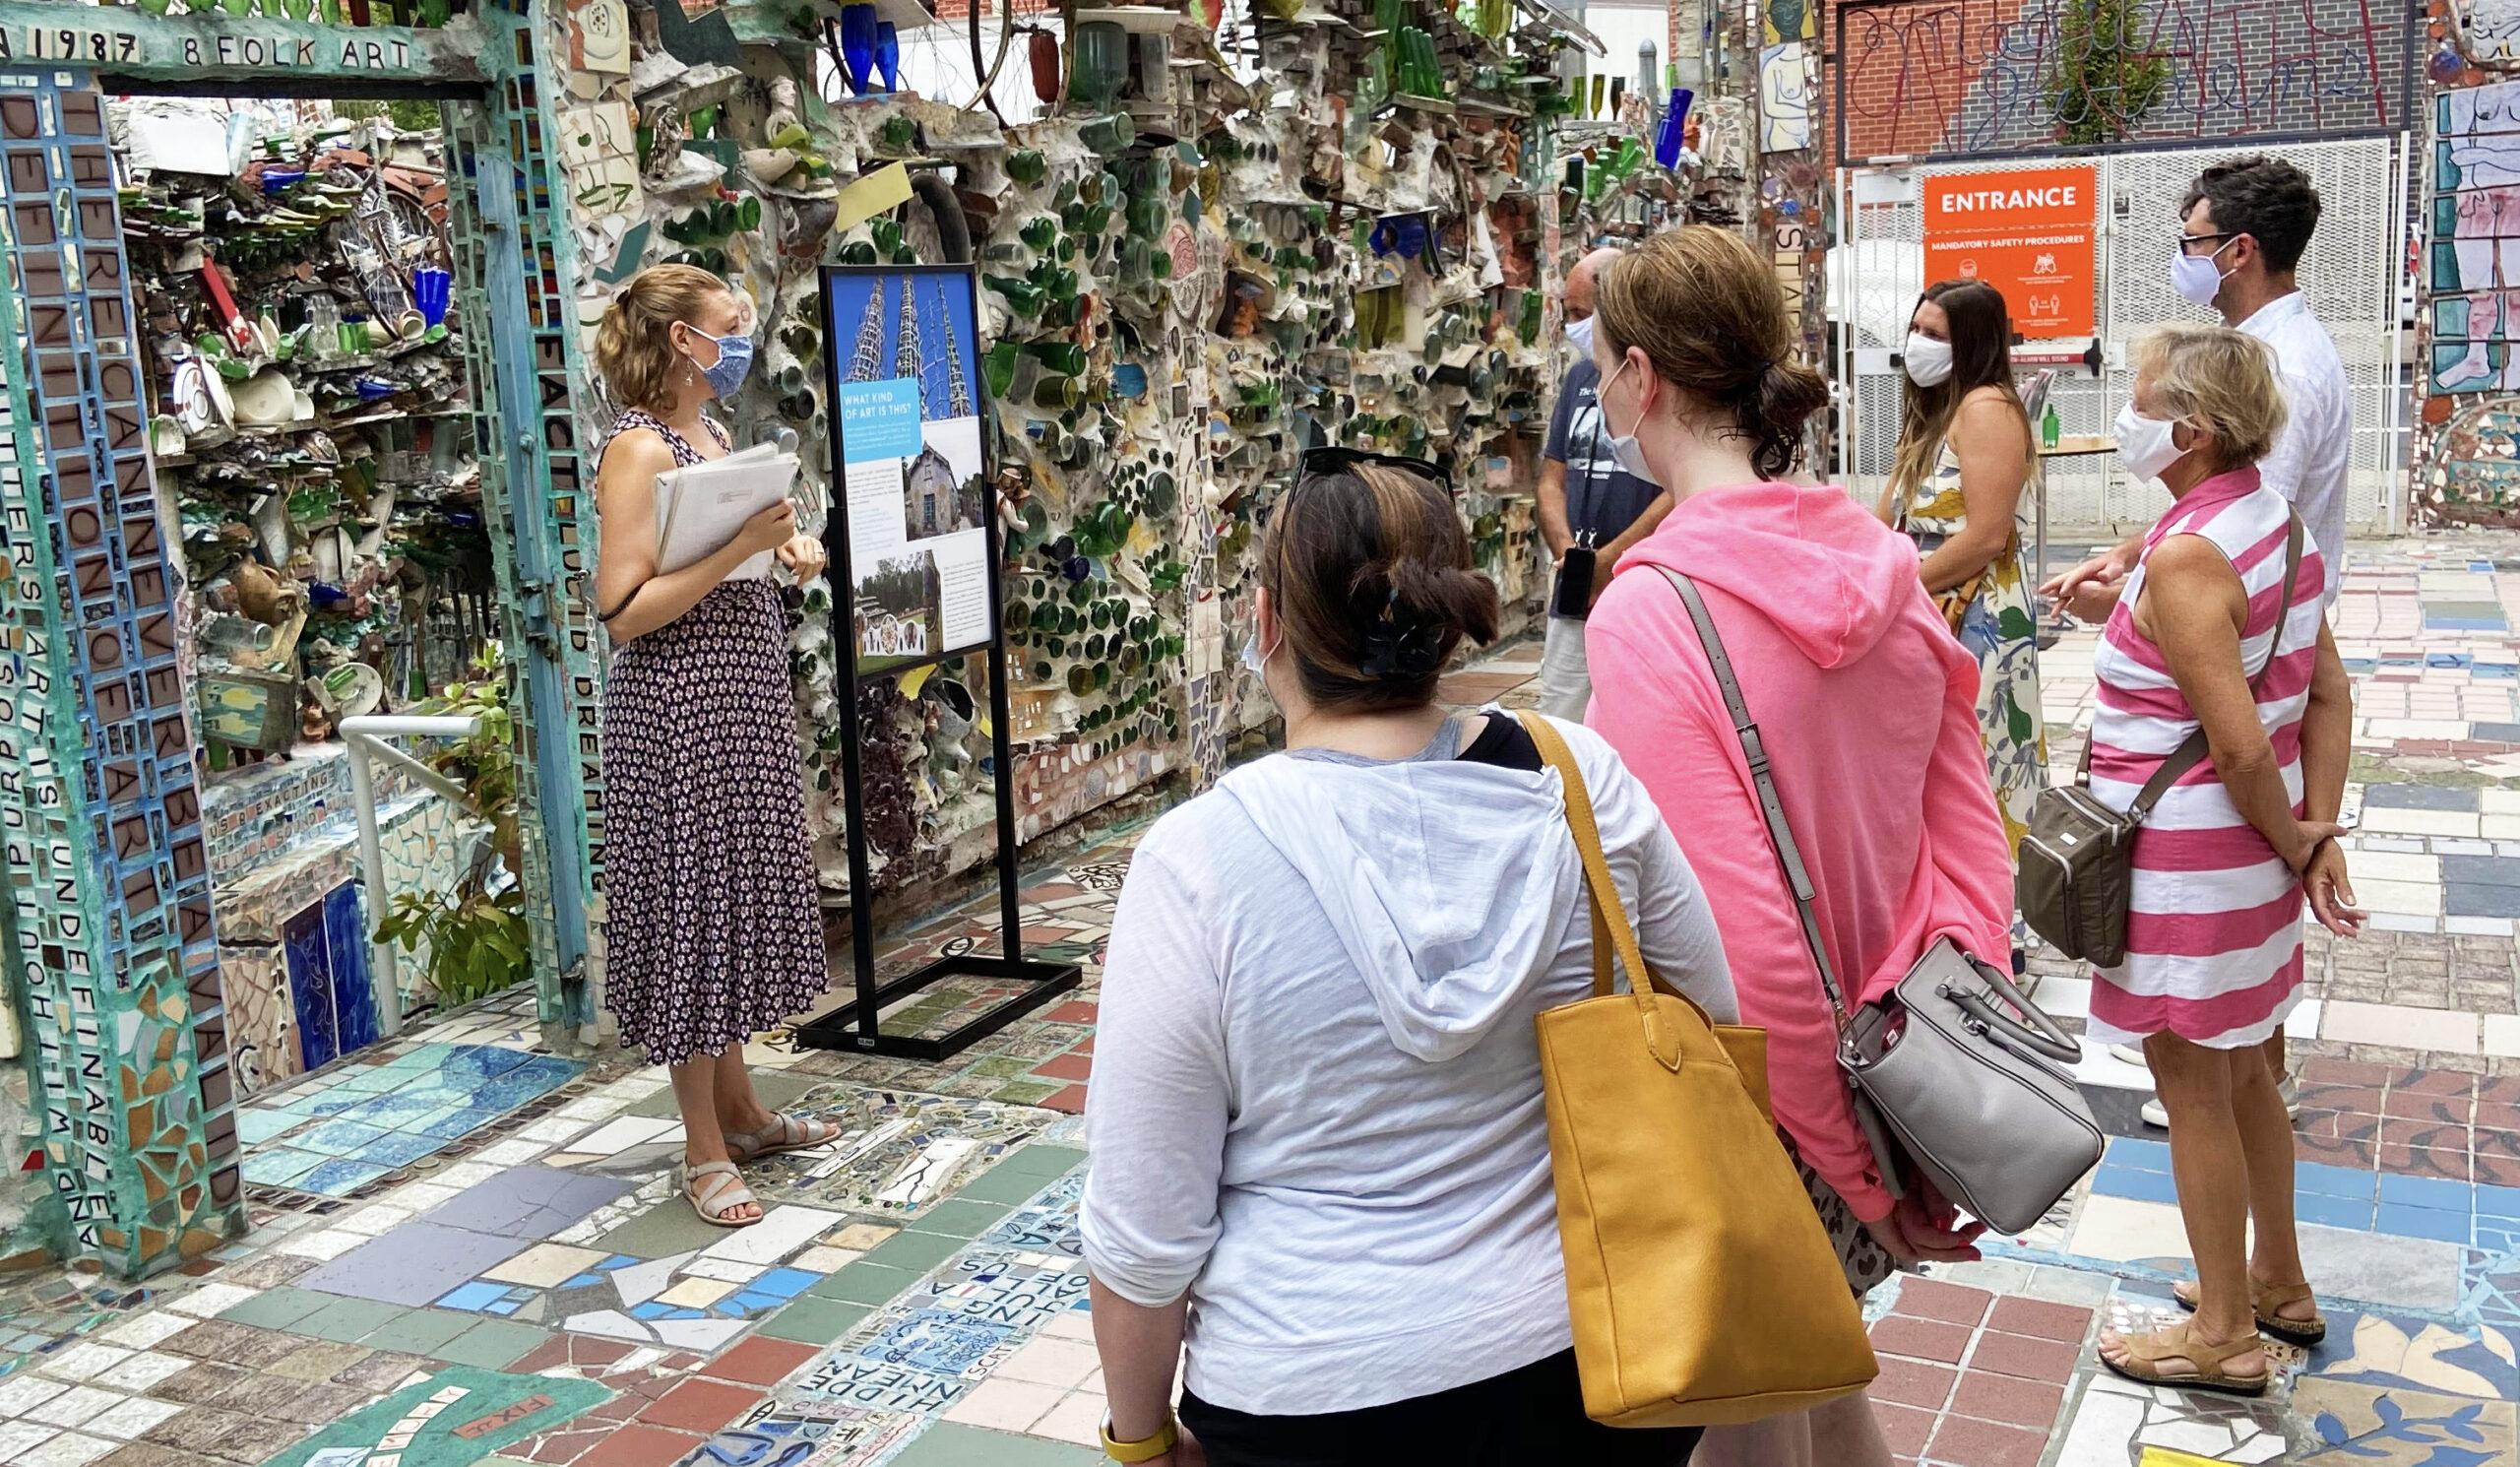 A tour guide wearing a dress and mask stands in front of a small group of people in the mosaicked courtyard of Philadelphia's Magic Gardens. She holds a stack of visual aids.